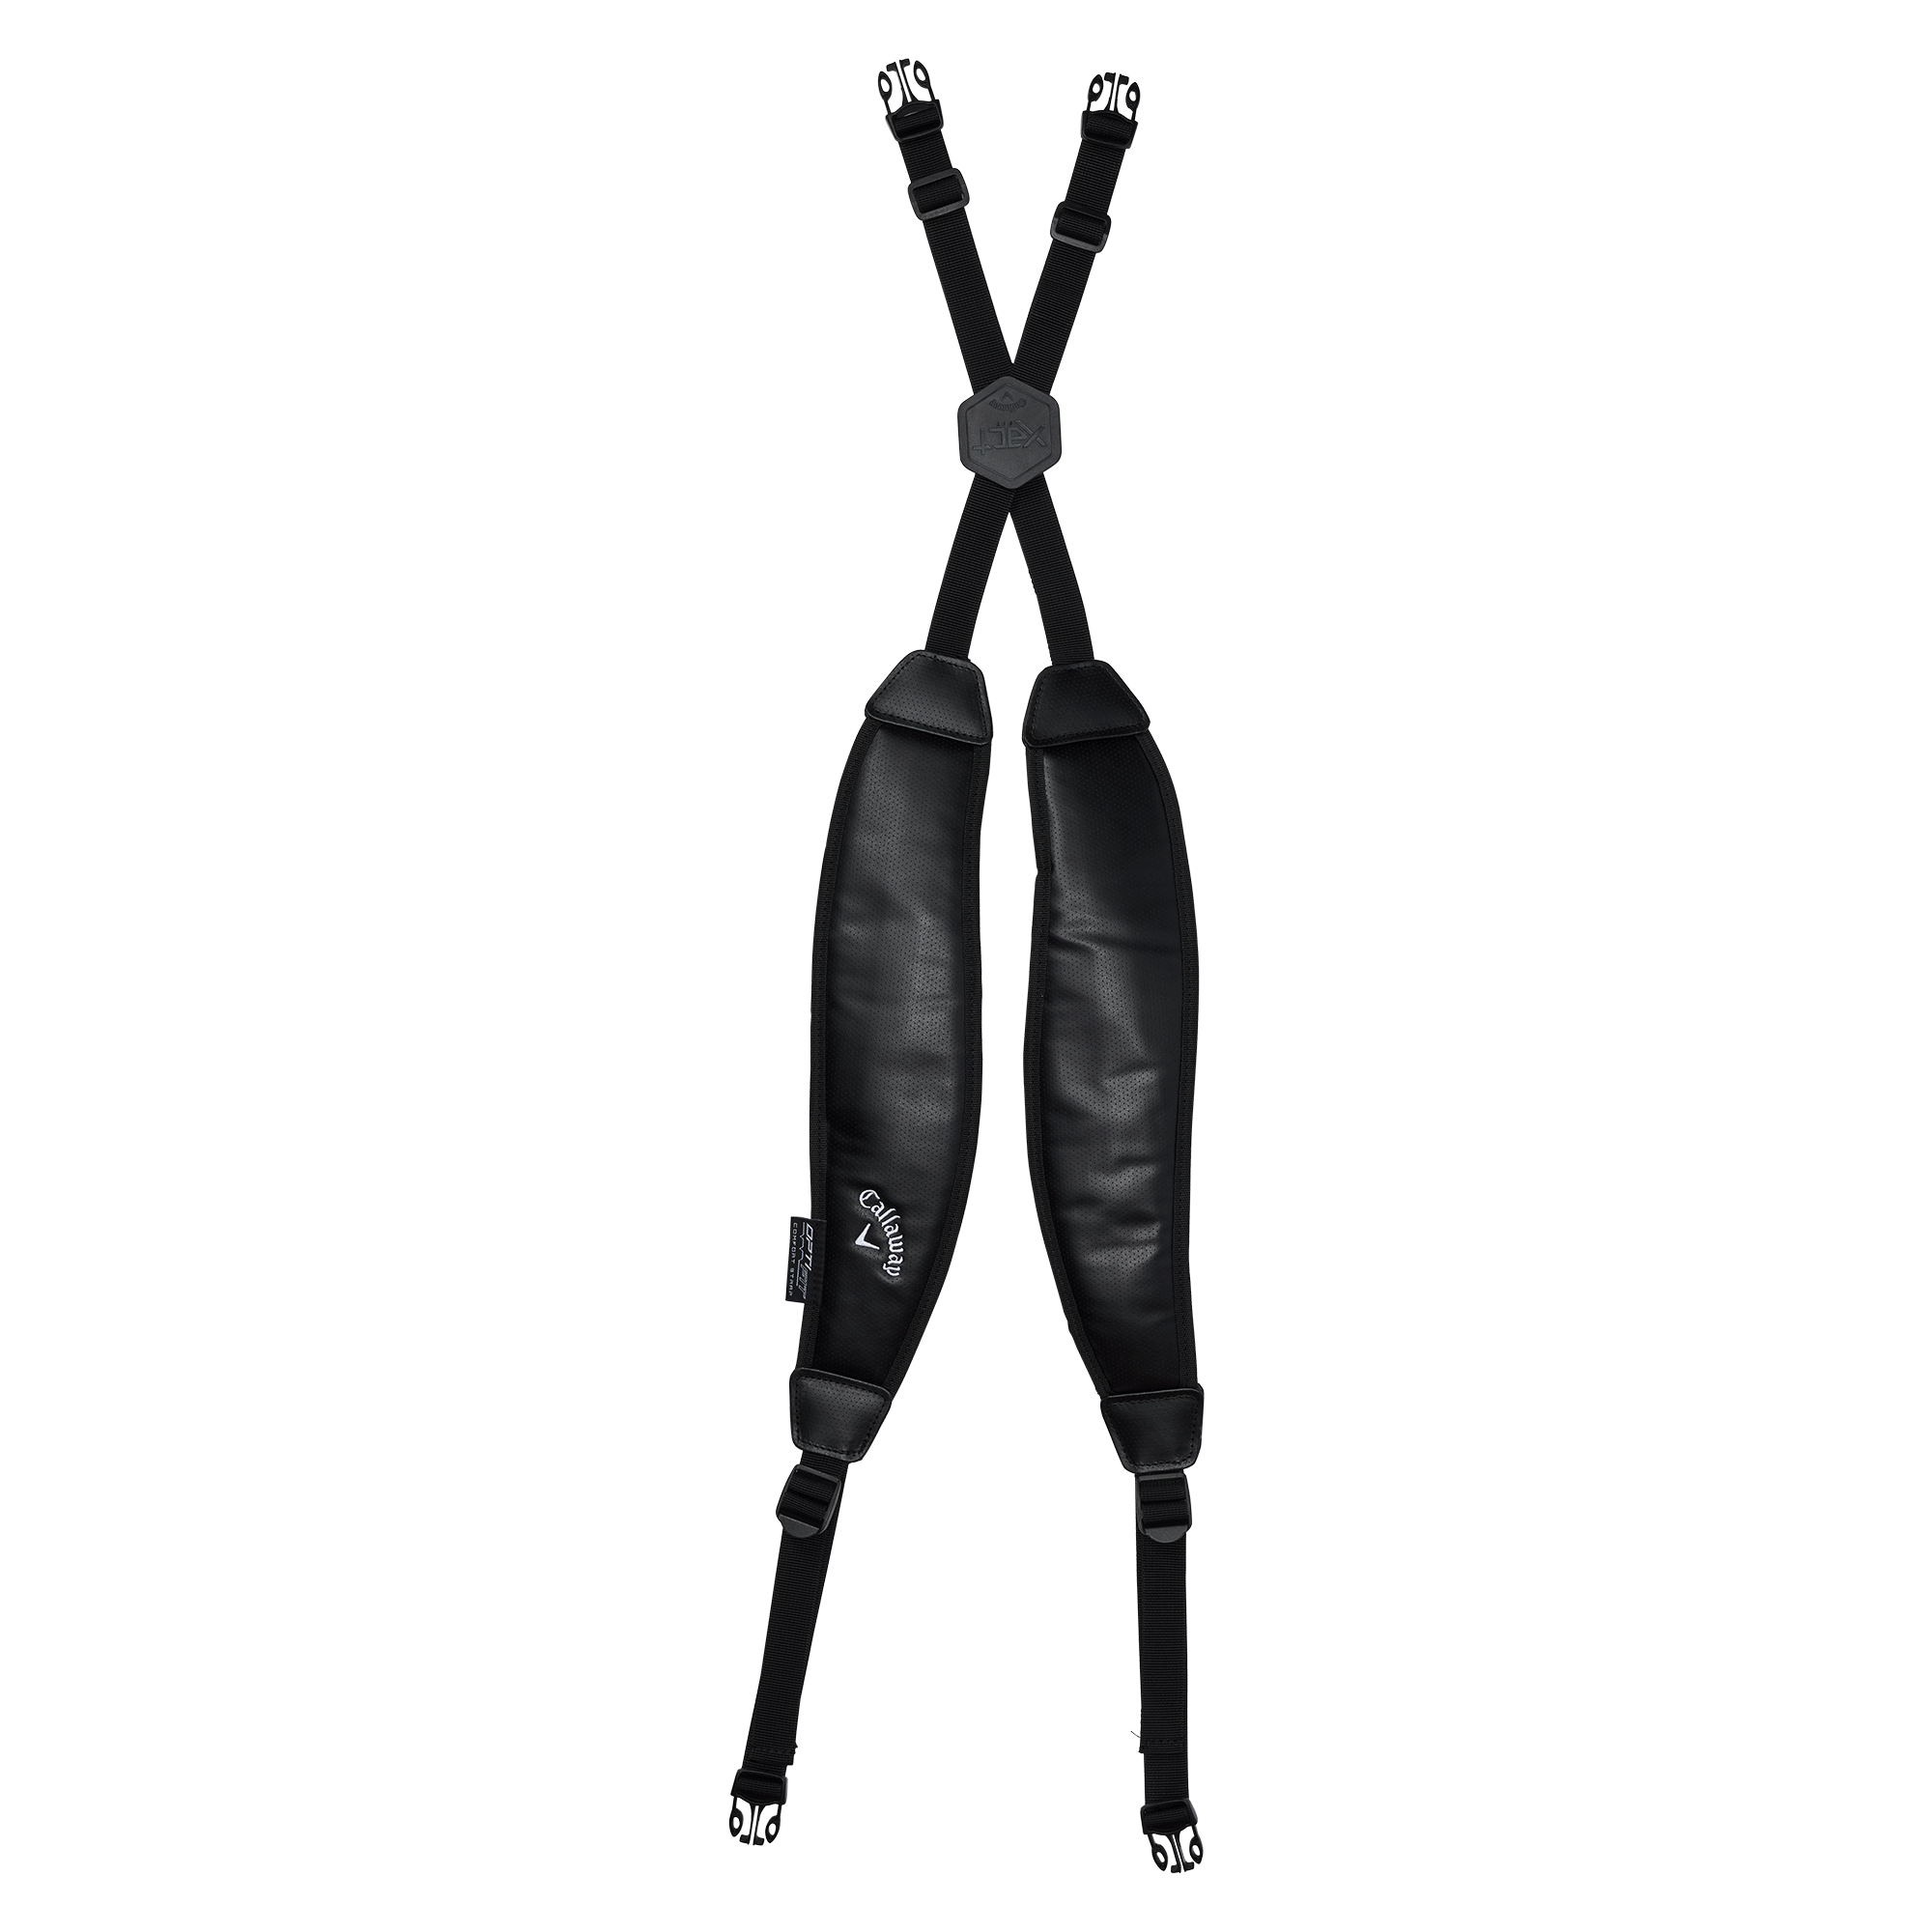 Hybrid Stand Bag | Shop the Highest Quality Golf Apparel, Gear, Accessories  and Golf Clubs at PXG